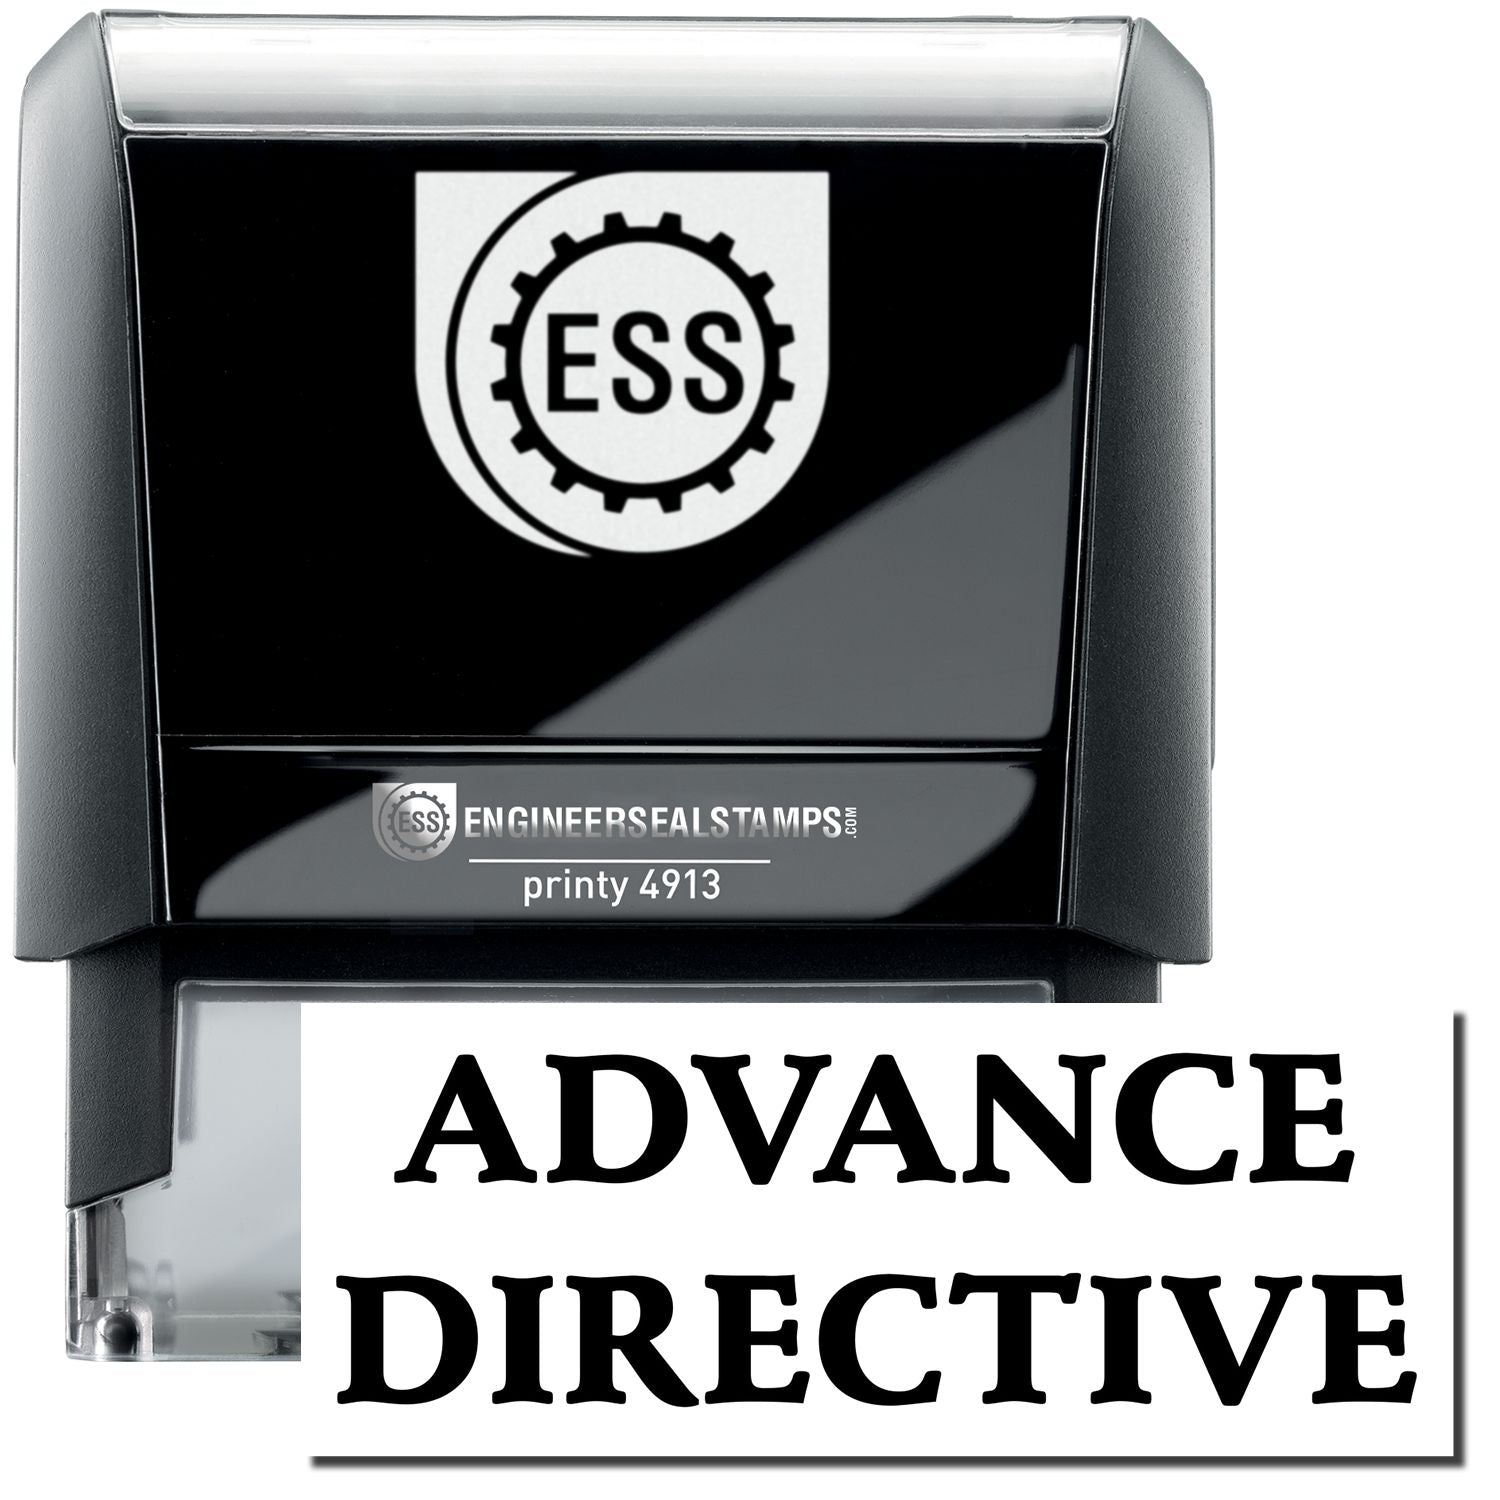 A self-inking stamp with a stamped image showing how the text "ADVANCE DIRECTIVE" in a large bold font is displayed by it.